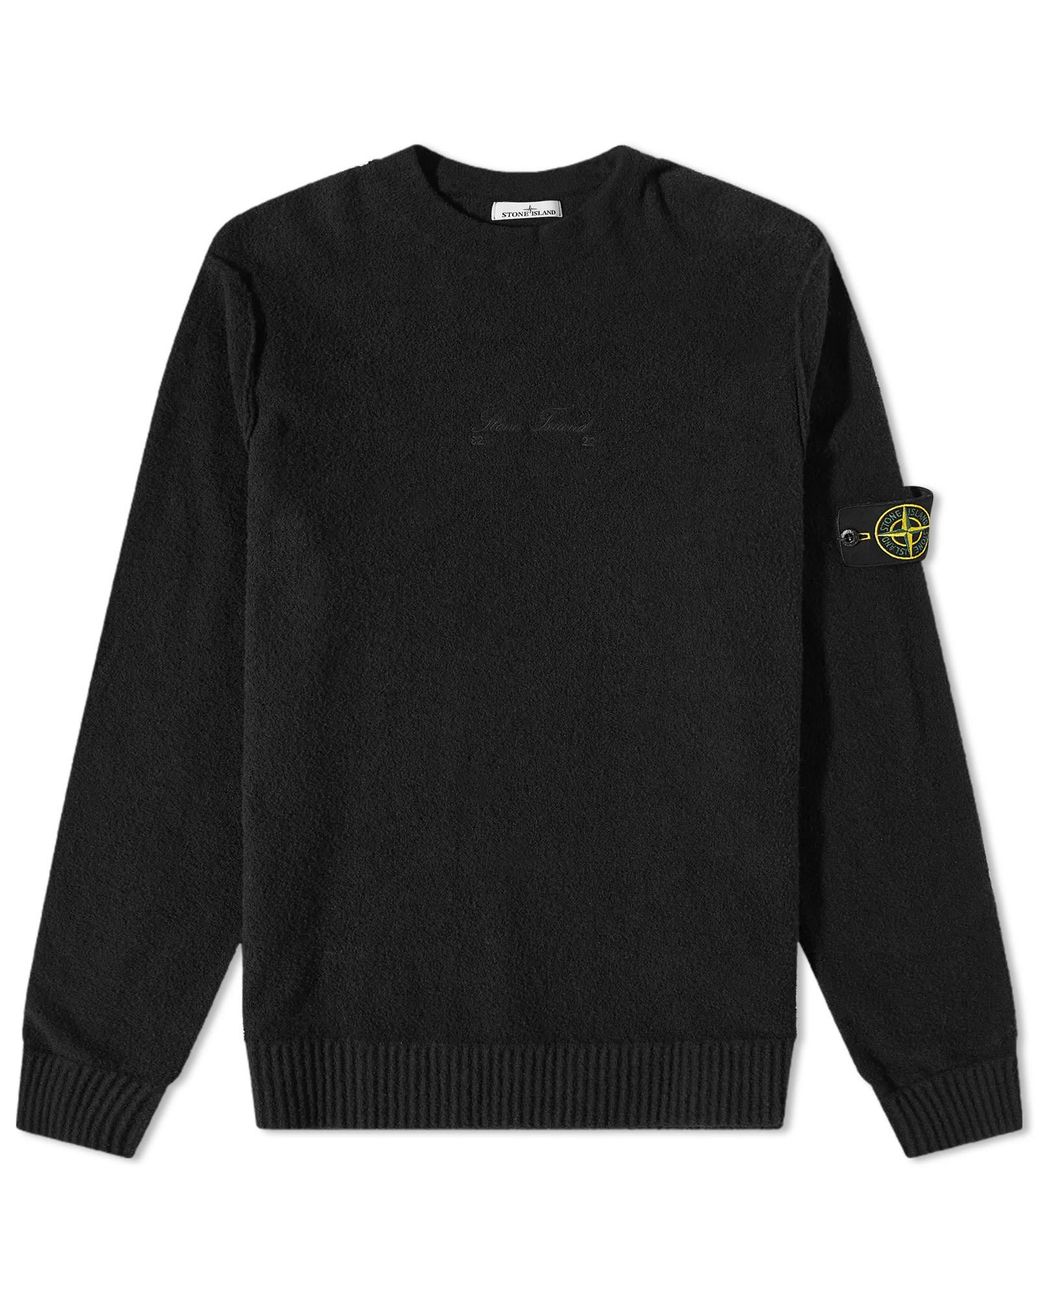 Stone Island 40th Anniversary Boucle Mock Neck Knit in Black | Lyst